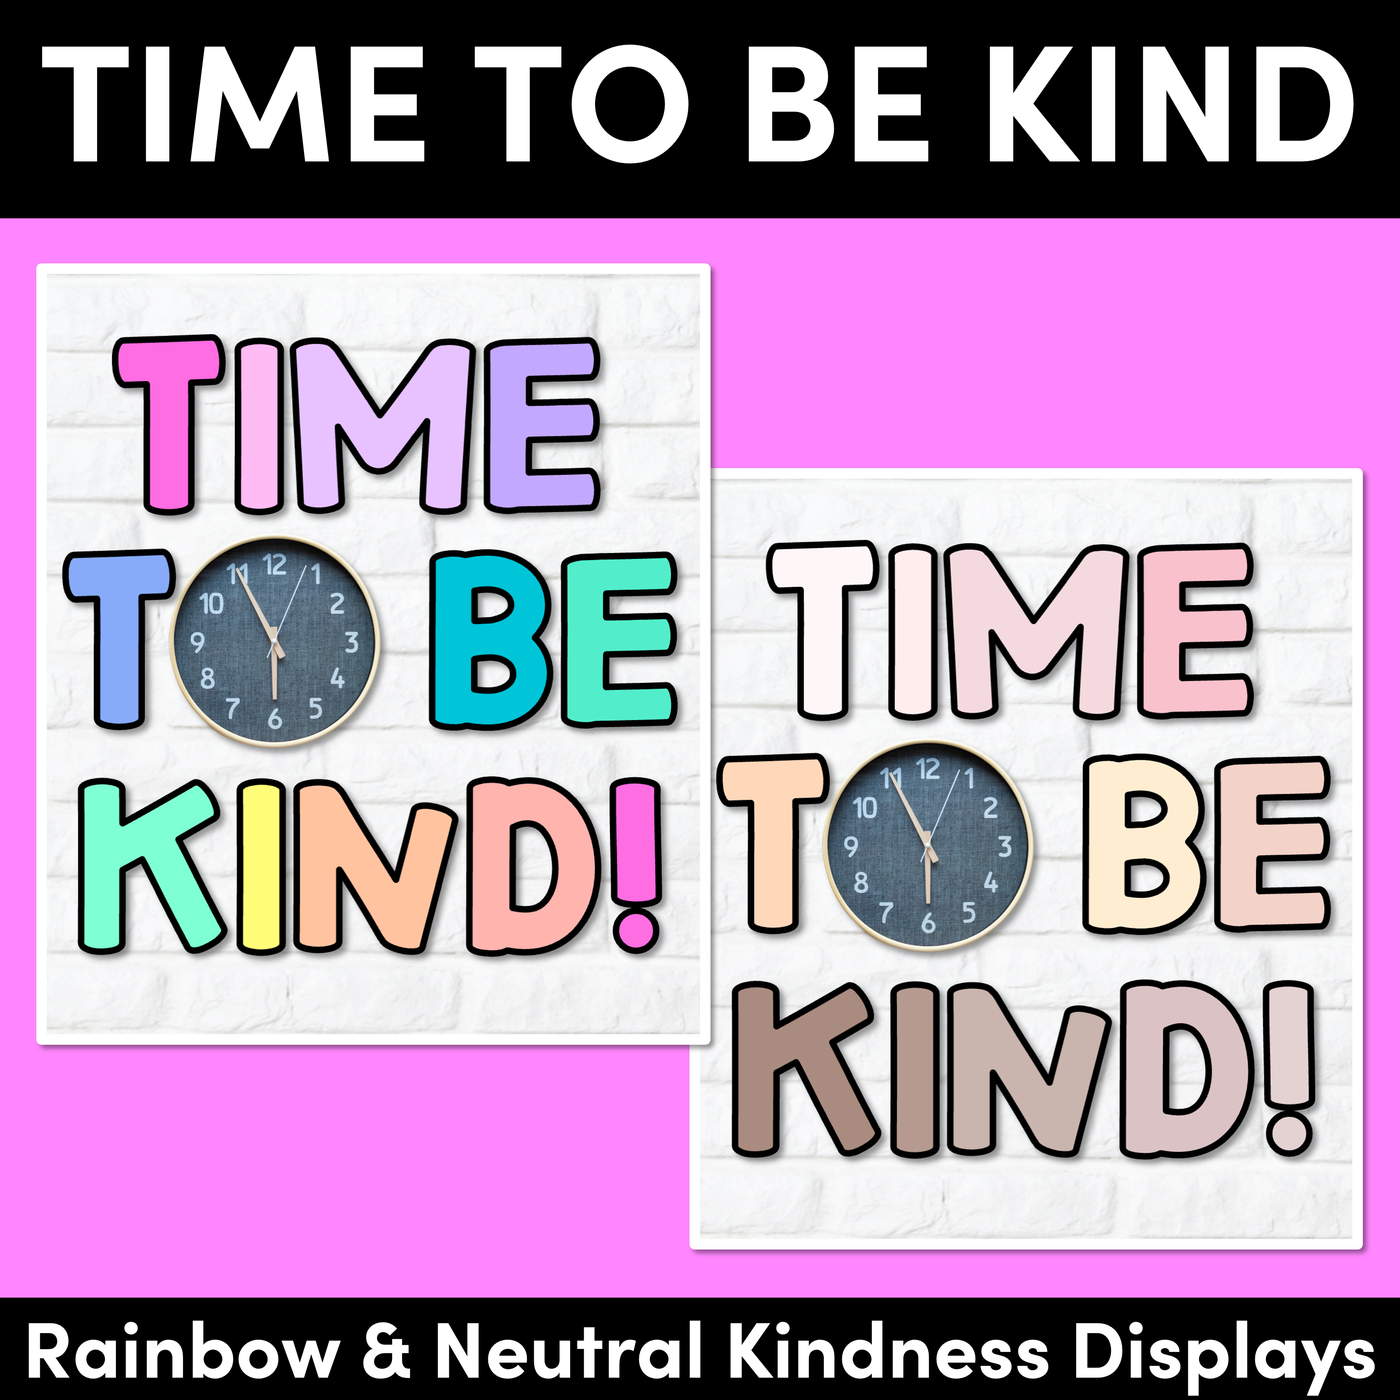 TIME TO BE KIND - Rainbow & Neutral Kindness Display